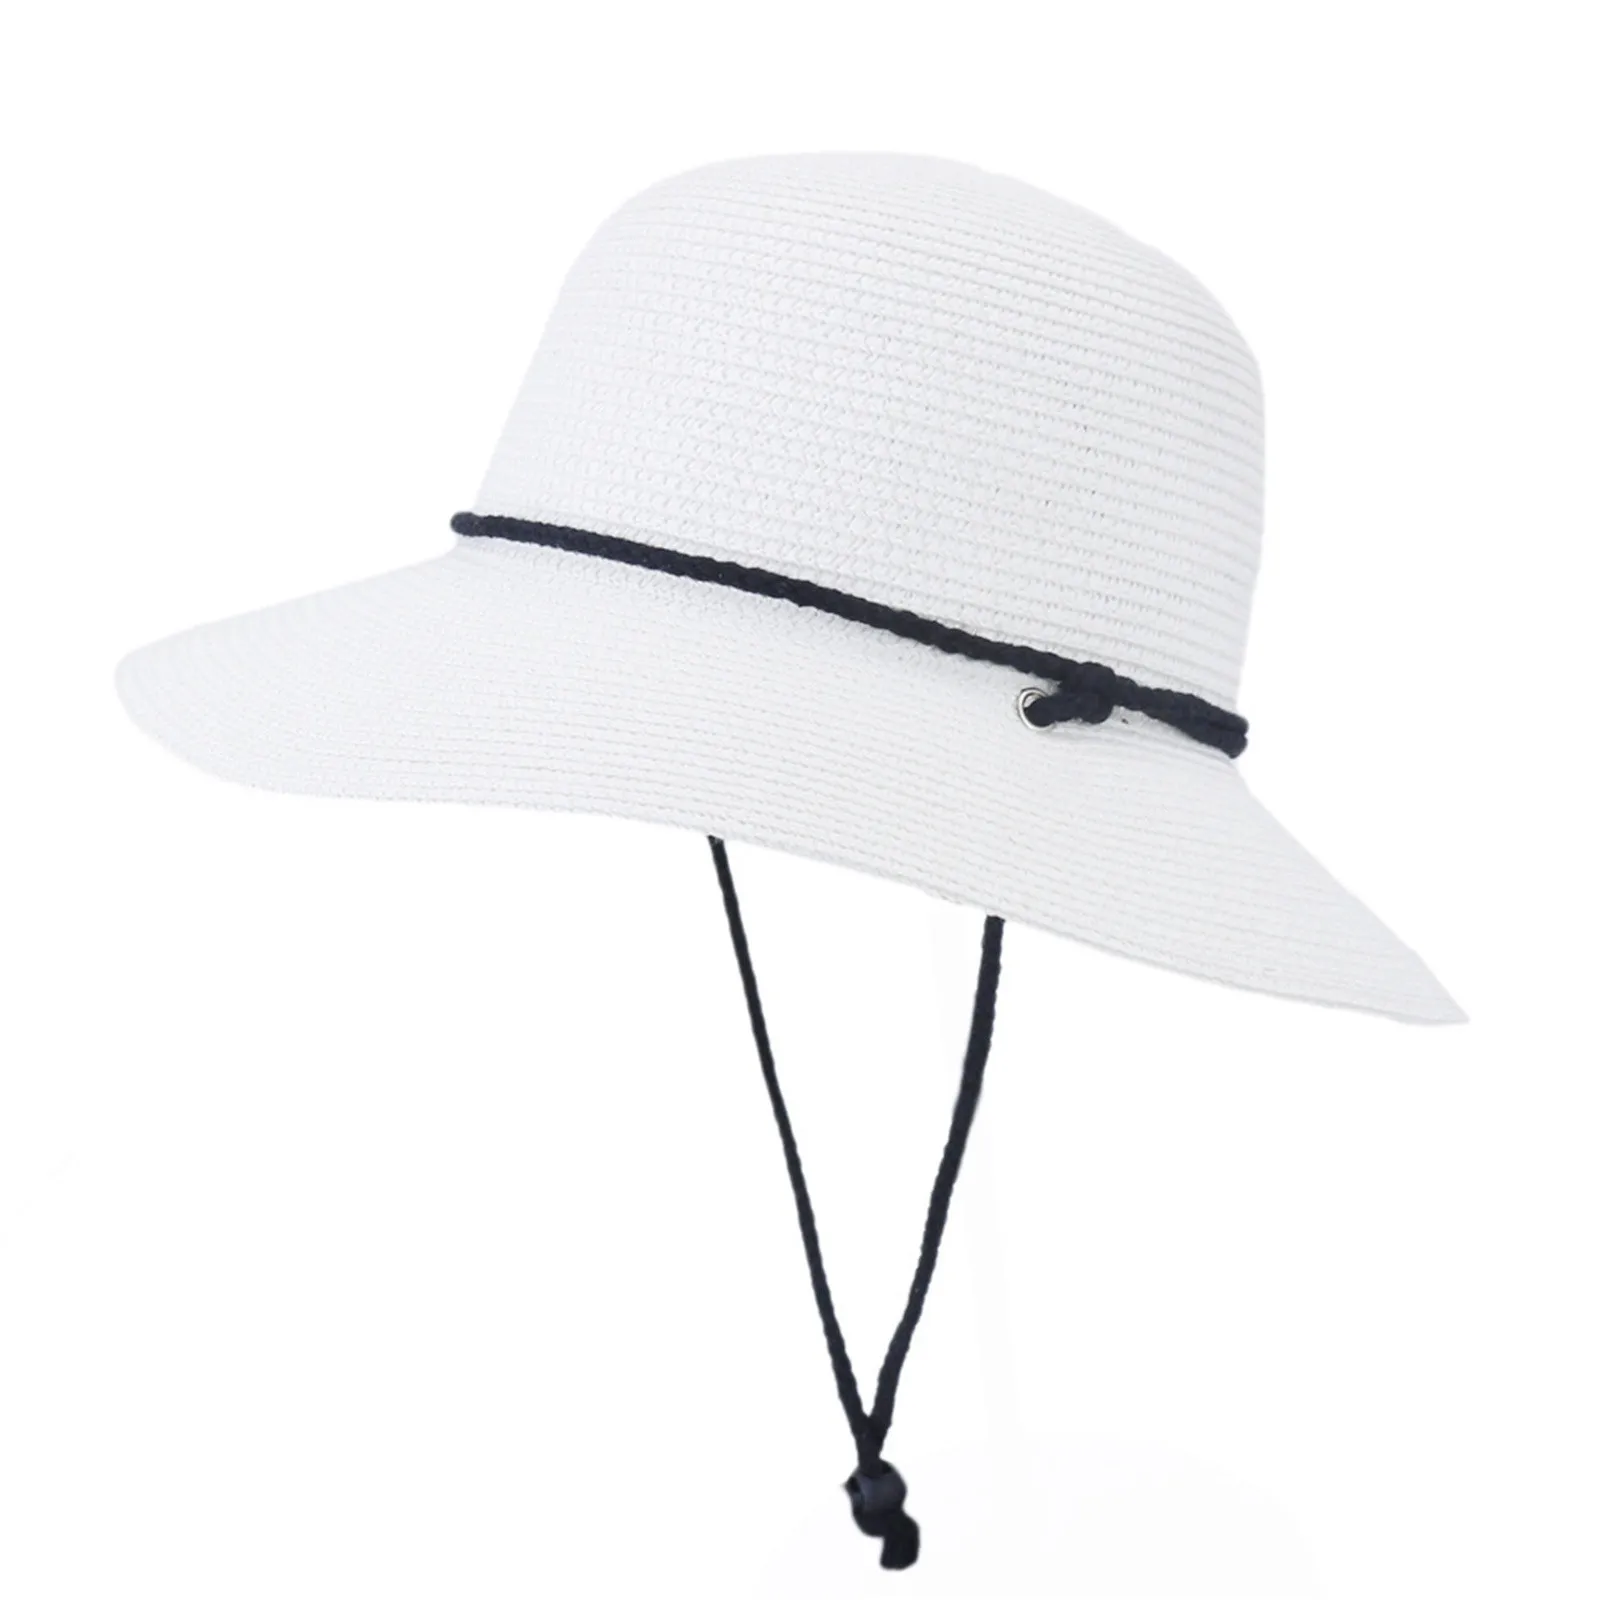 

Woman Hats For The Sun Large Edge Dome Wide-Brimmed Sun Hats With Windproof Lanyard Straw Sun Hat Sombrero Mujer Para El Sol